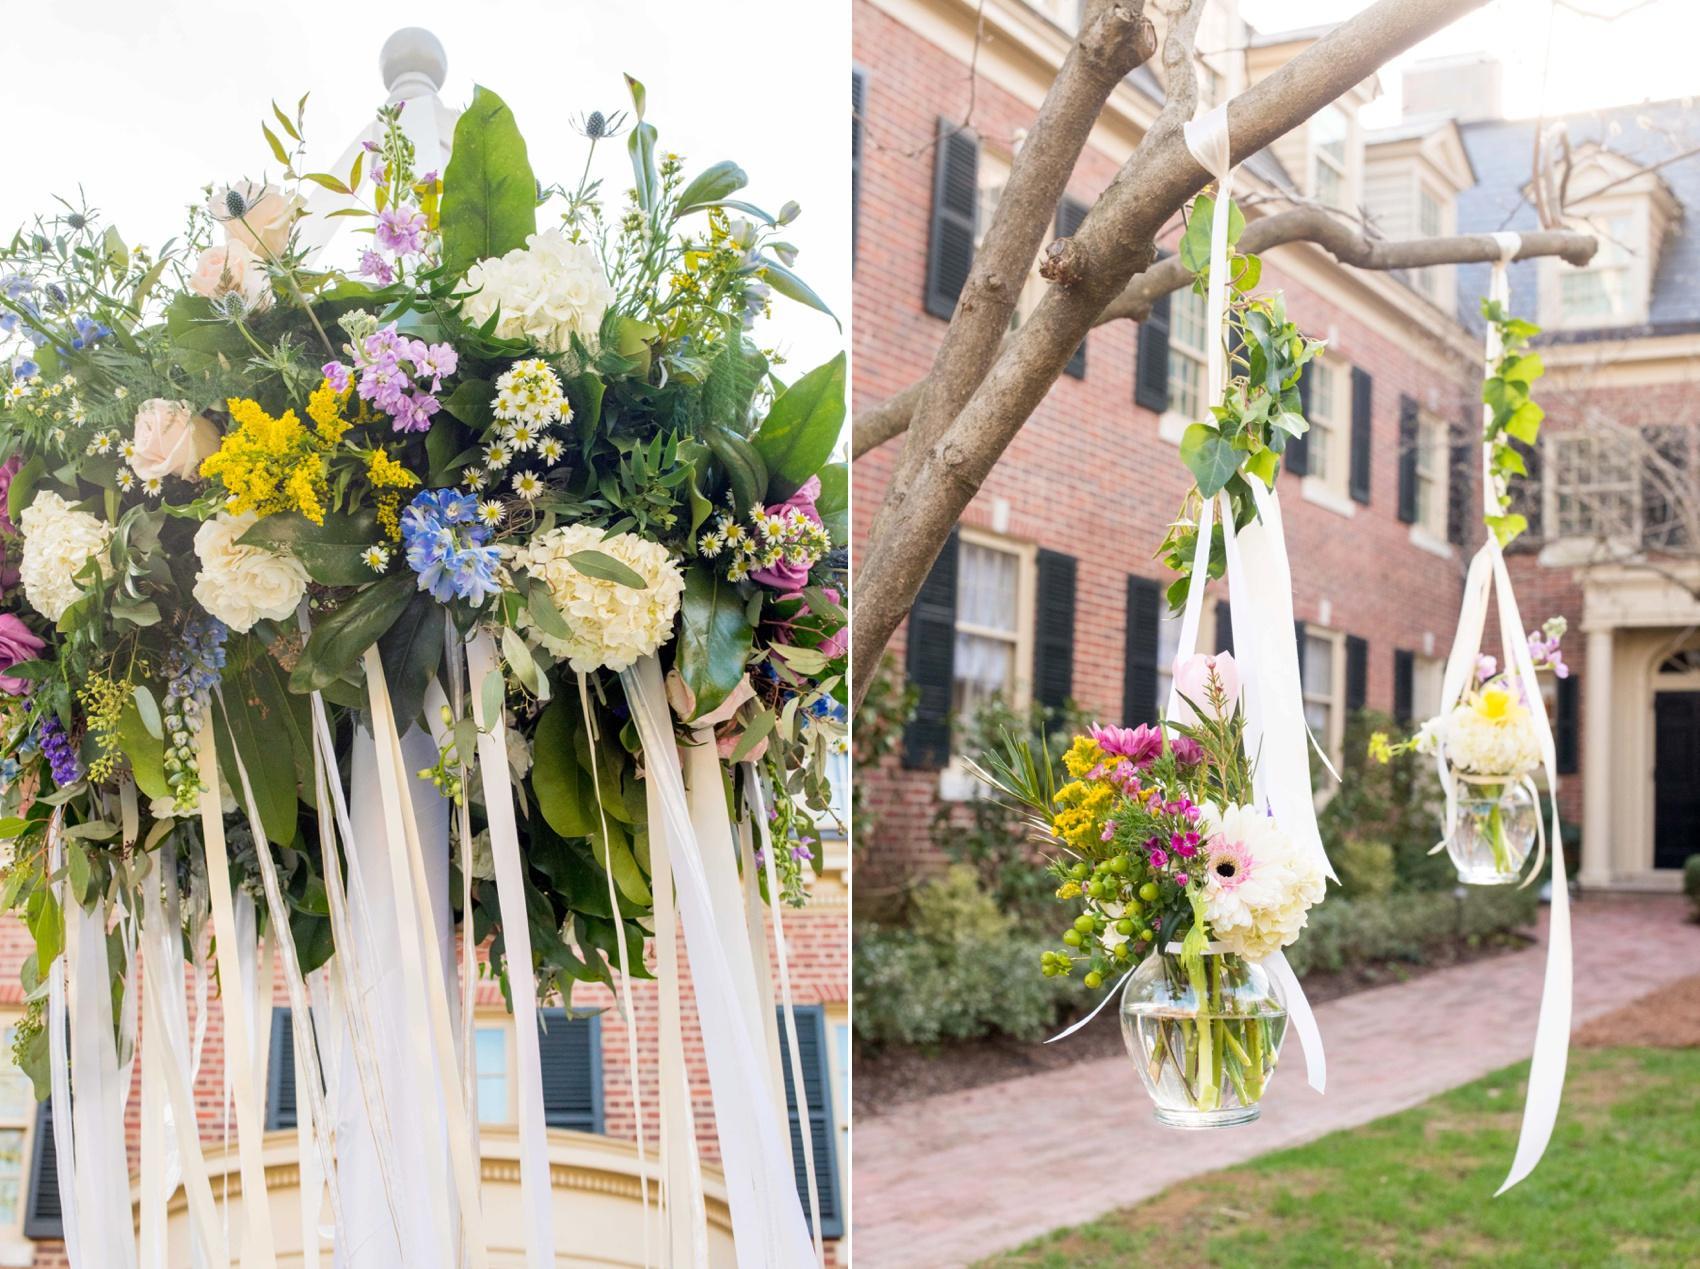 The Carolina Inn wedding photos - bridal showcase 2016. Mikkel Paige Photography captures the event. Ceremony maypole setup by The English Garden and A Southern Soiree.